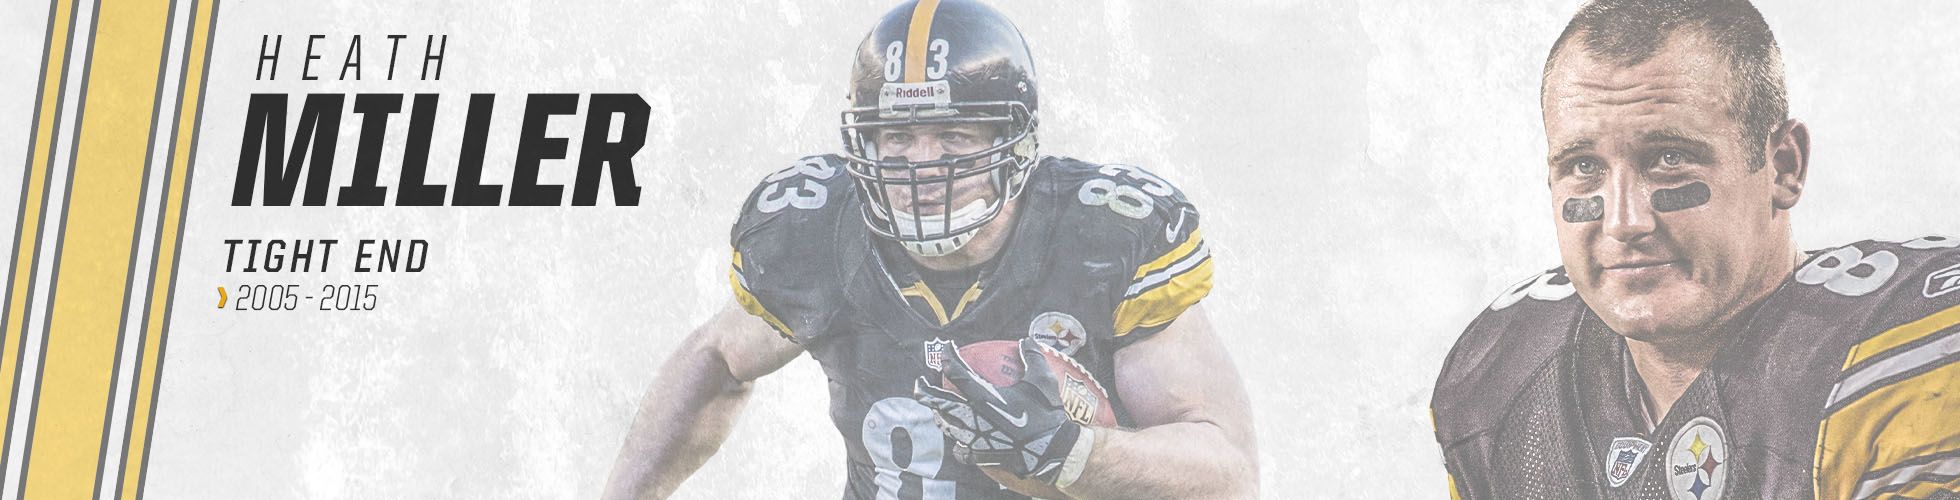 Heath Miller named to Virginia Sports Hall of Fame